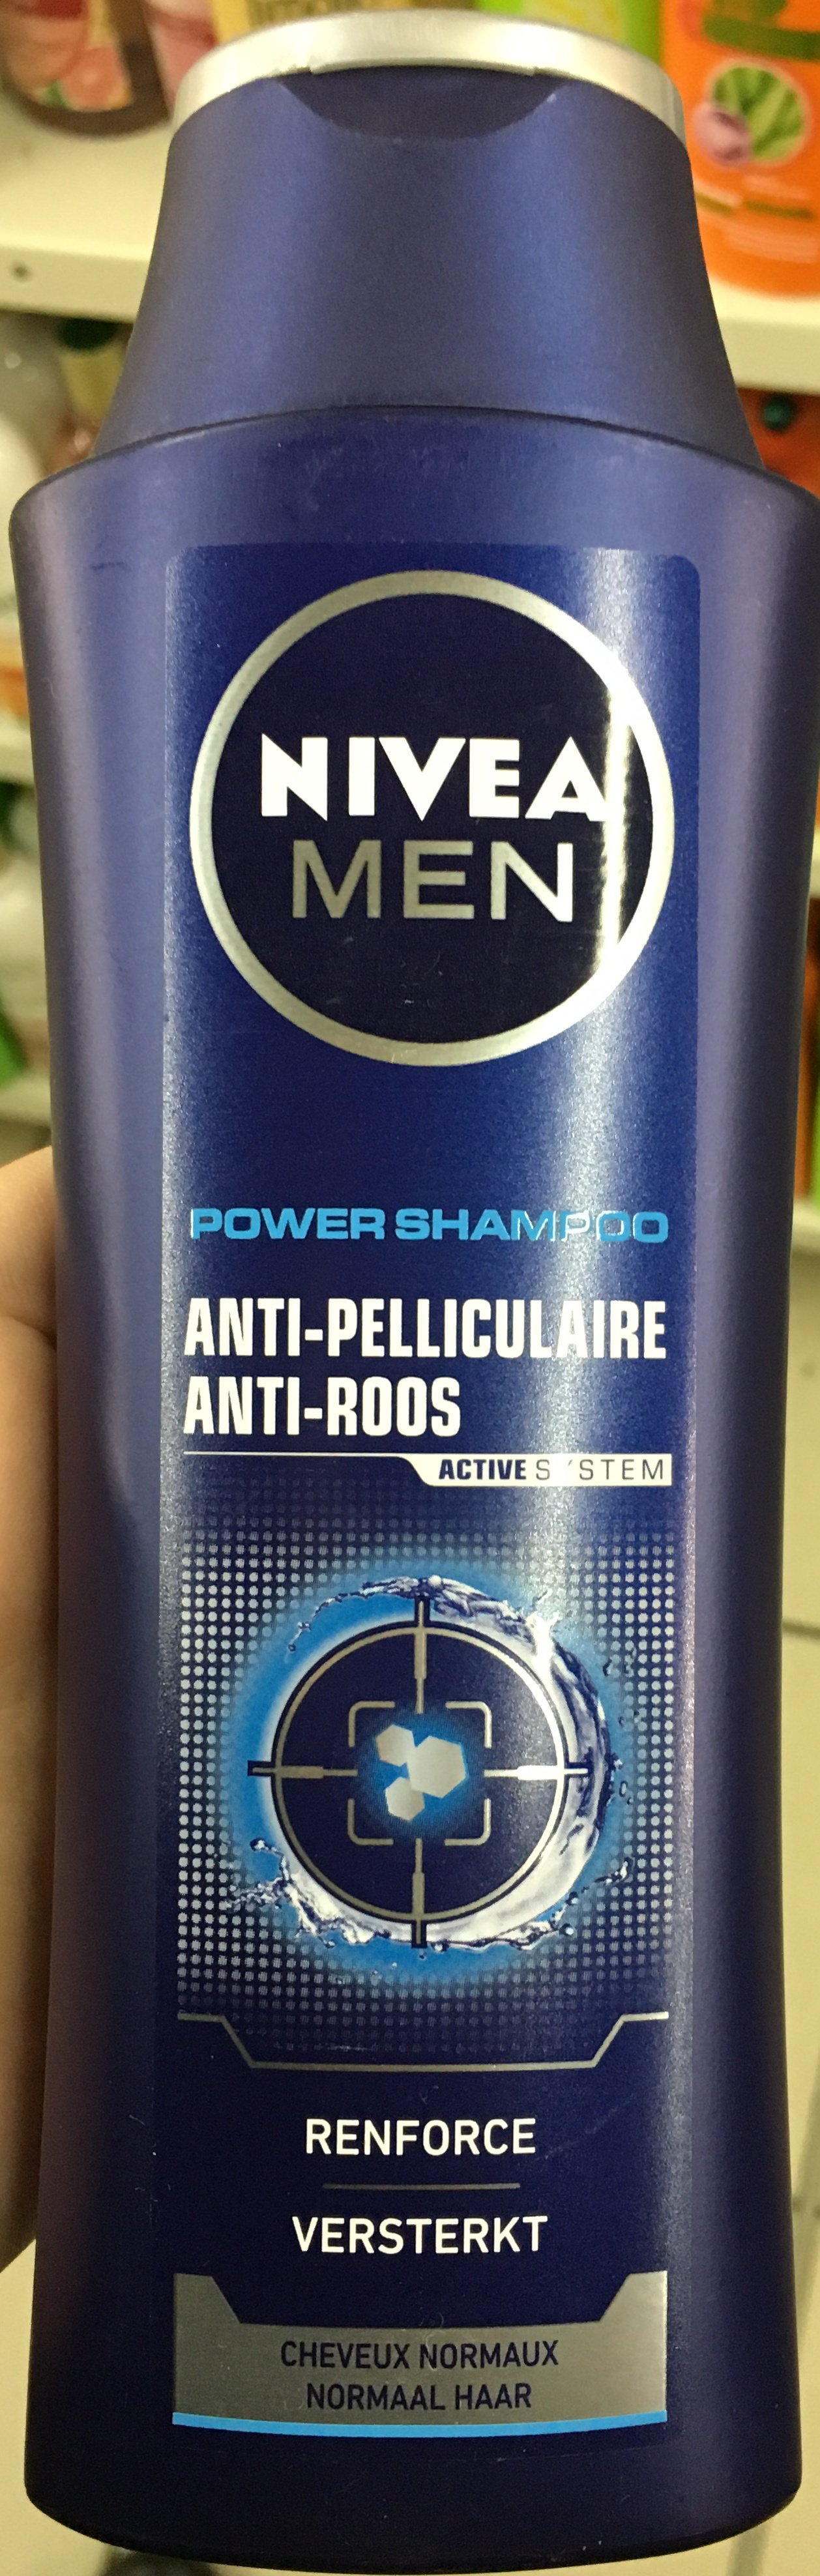 Power Shampoo Anti-pelliculaire - Product - fr